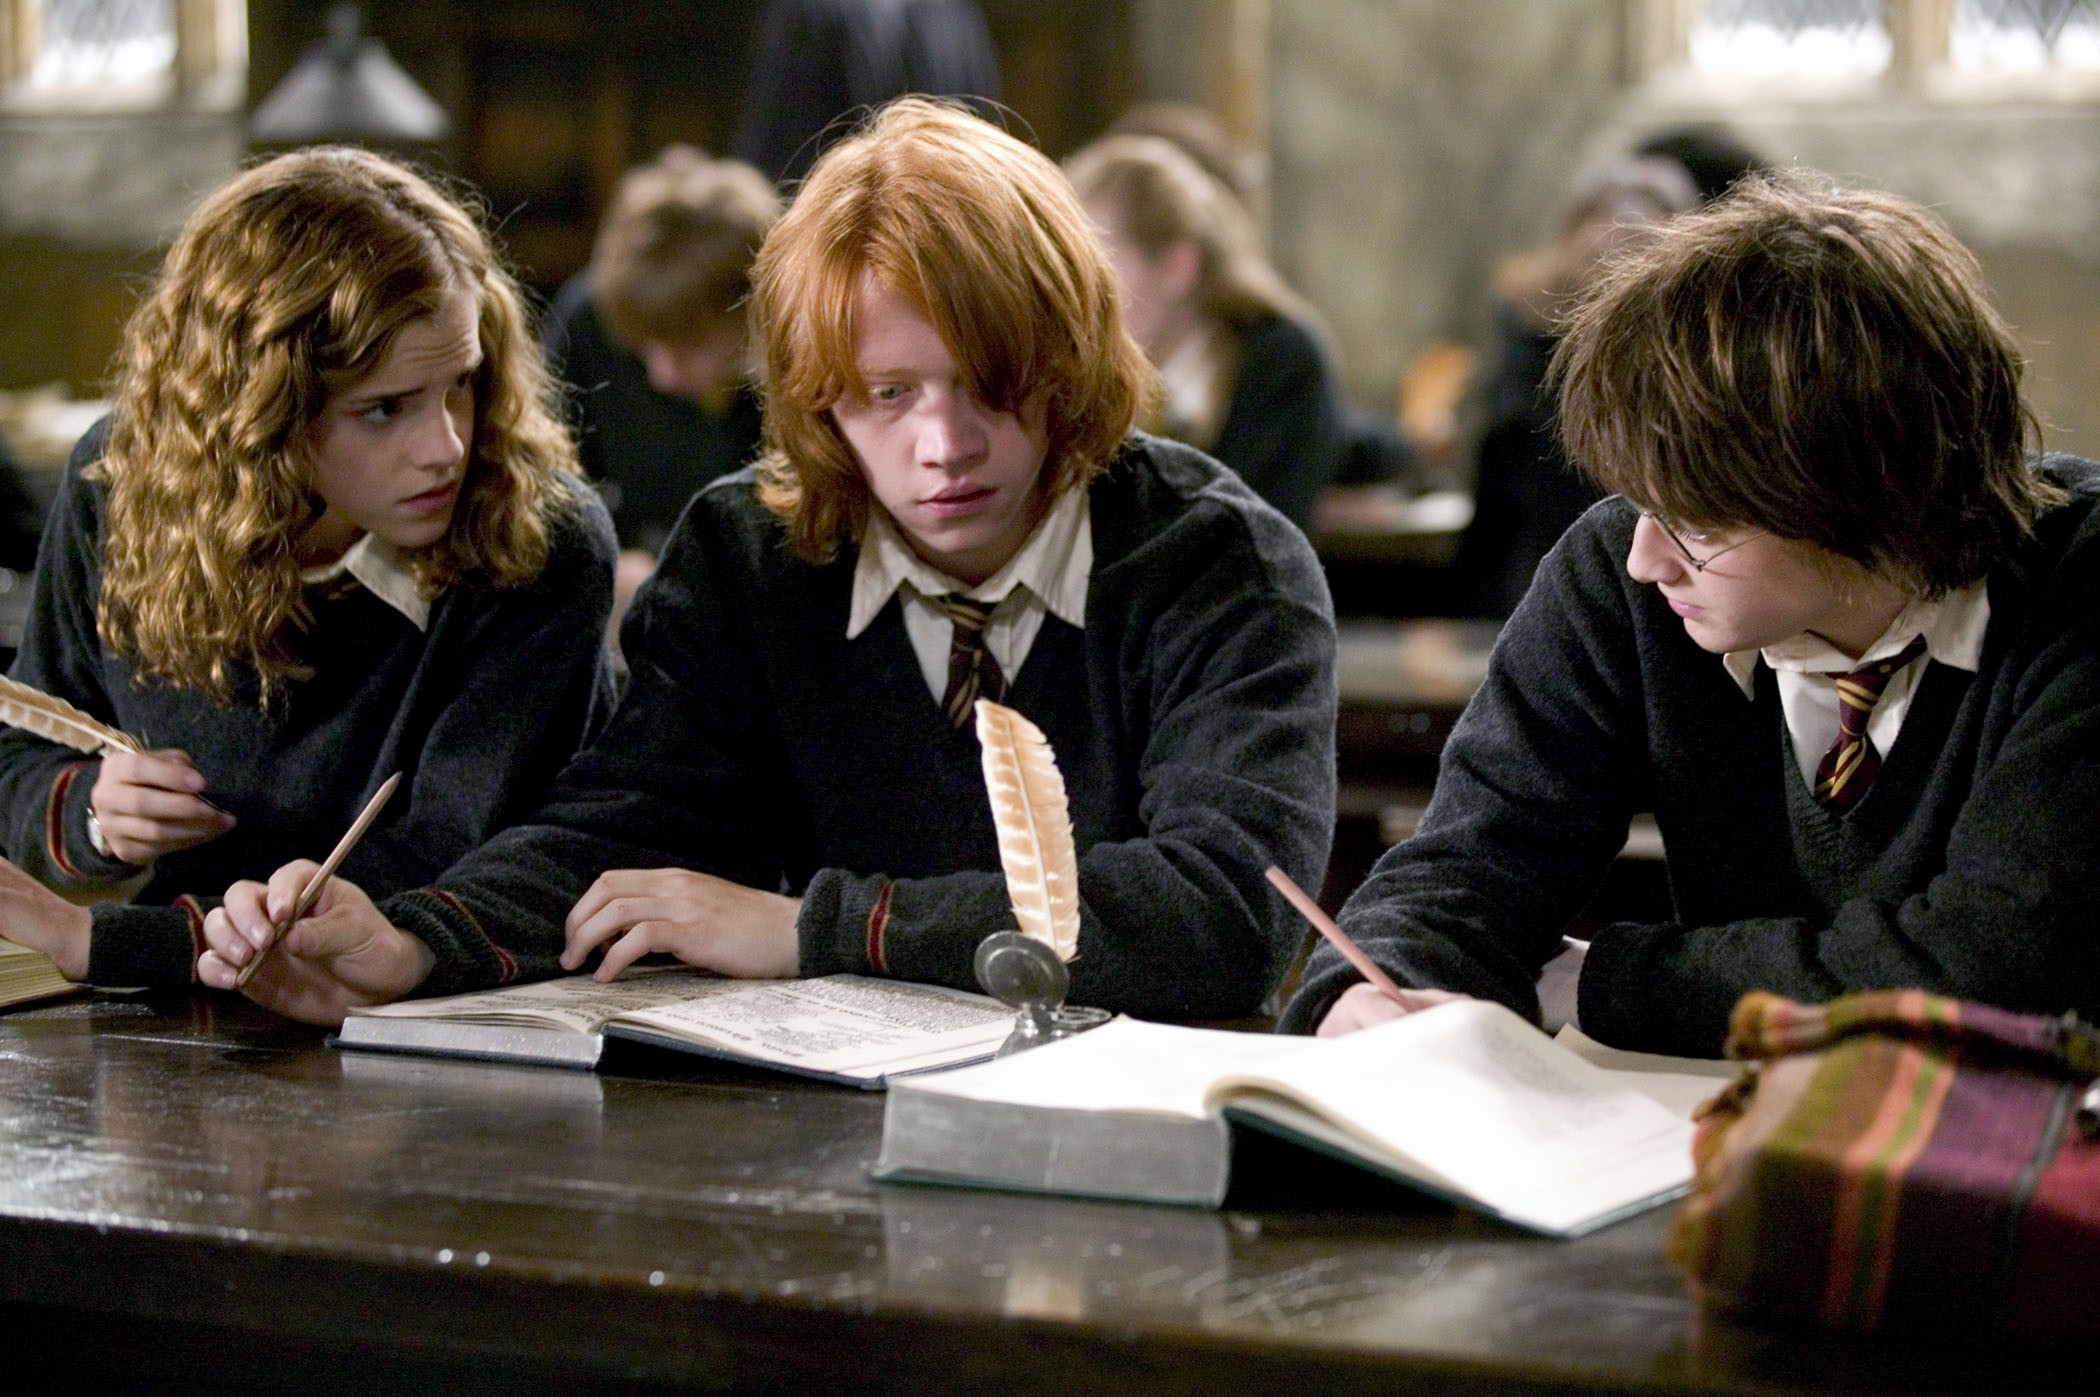 Emma Watson, Rupert Grint and Daniel Radcliffe in "Harry Potter and The Goblet of Fire" (Warner Bros.—courtesy Everett Collection)